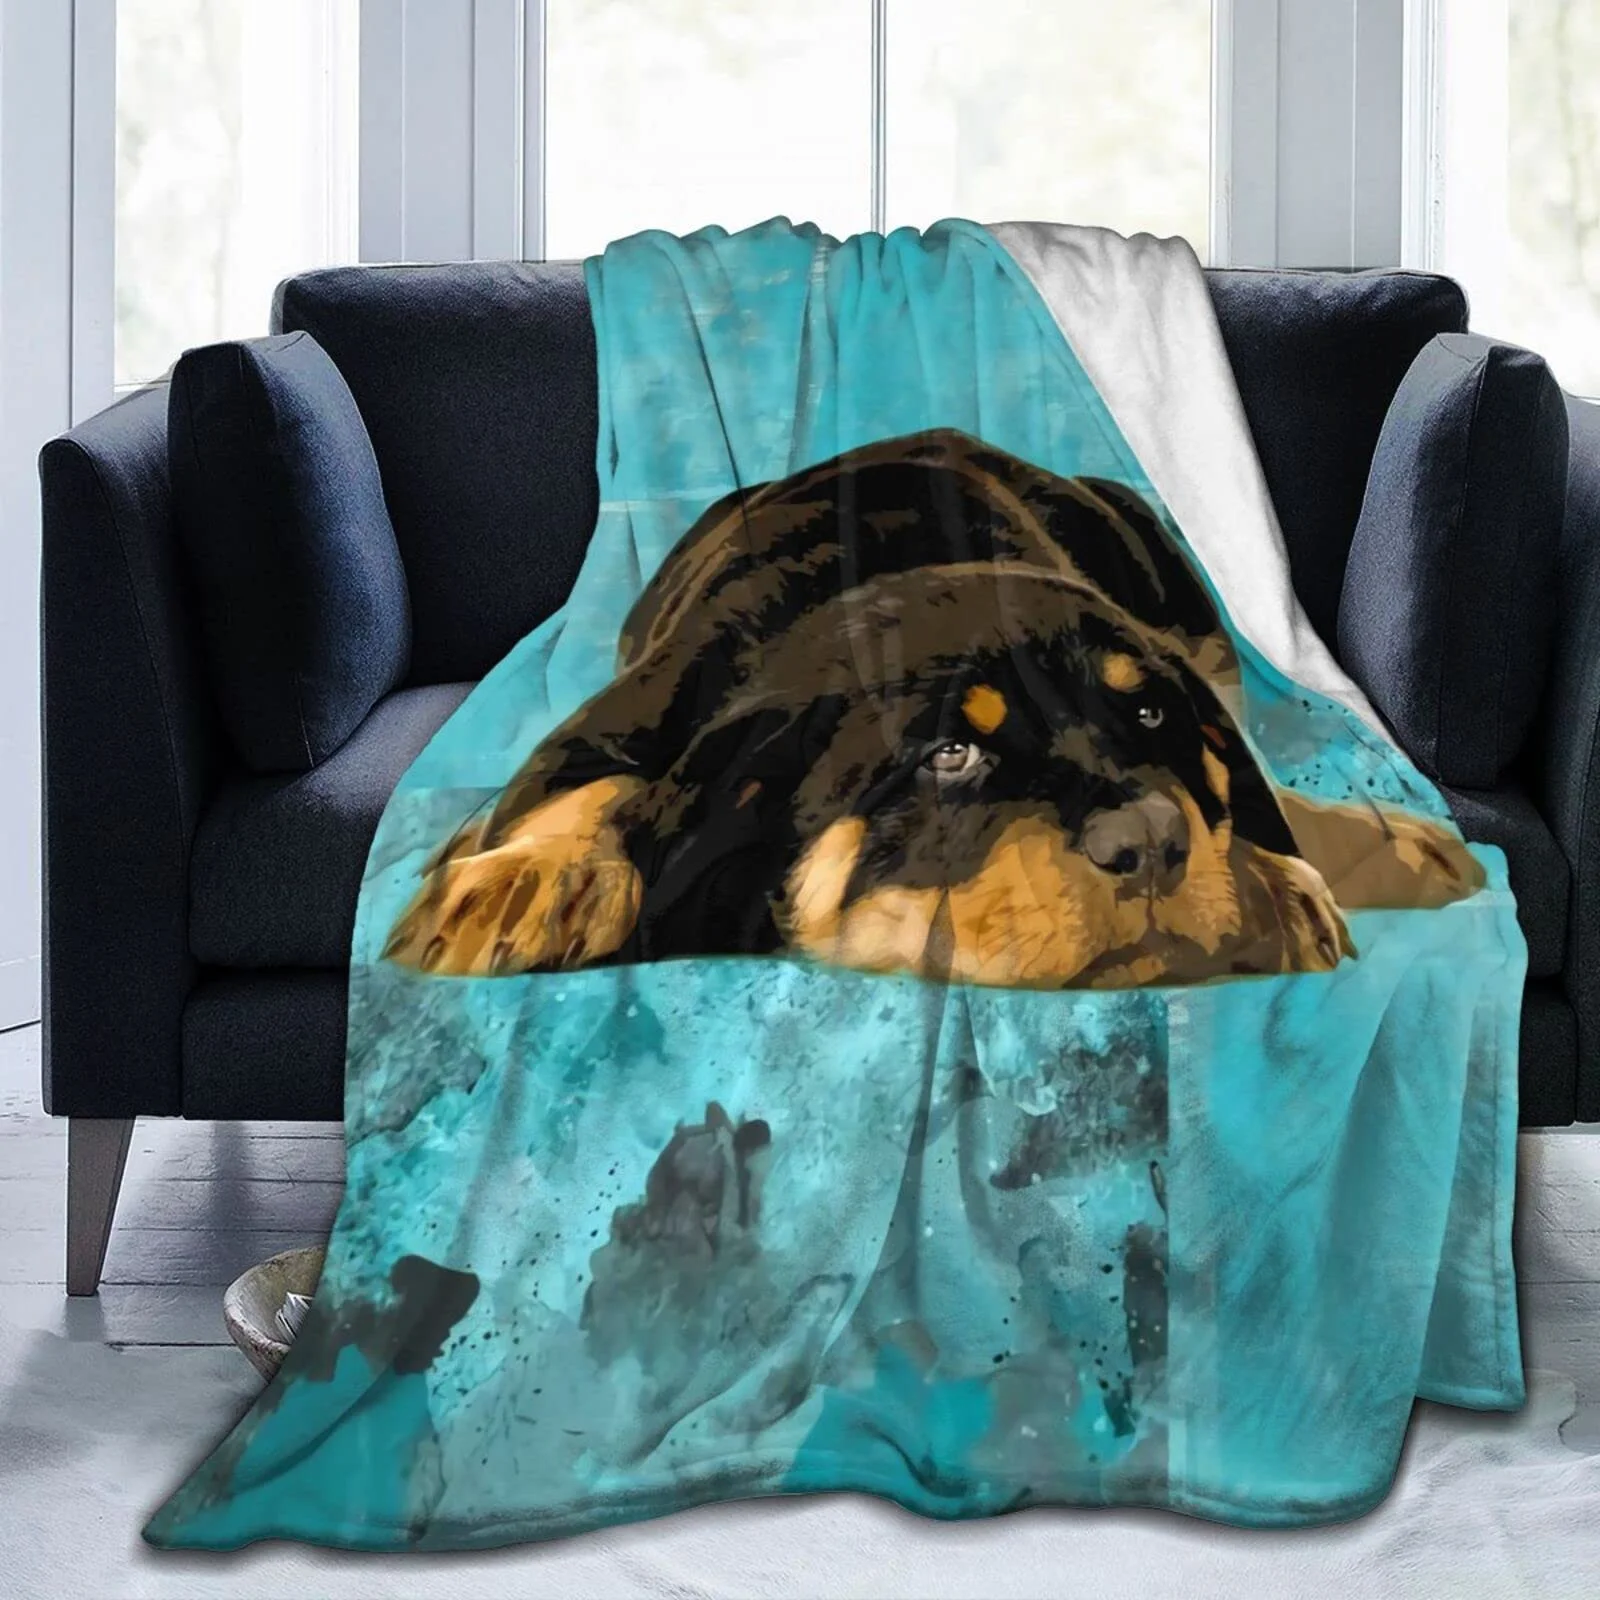 

Blankets Flannel Bed Couch Throws Lightweight All Seasons Suitable Women Men Kids Couple Camping Customized Shih Tzu Dog Black